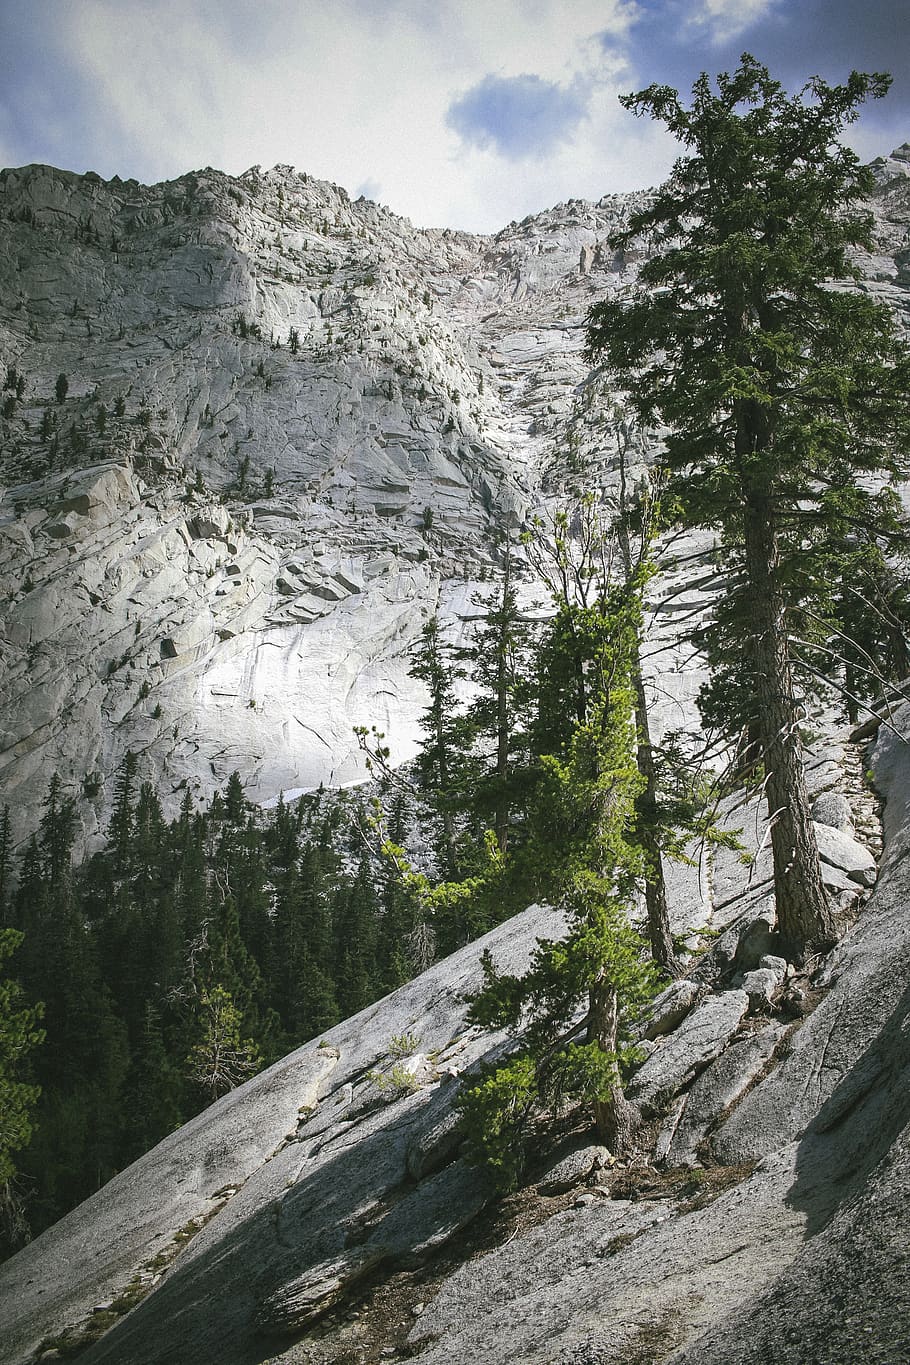 united states, whitney portal, trees, forest, lone pine, wilderness